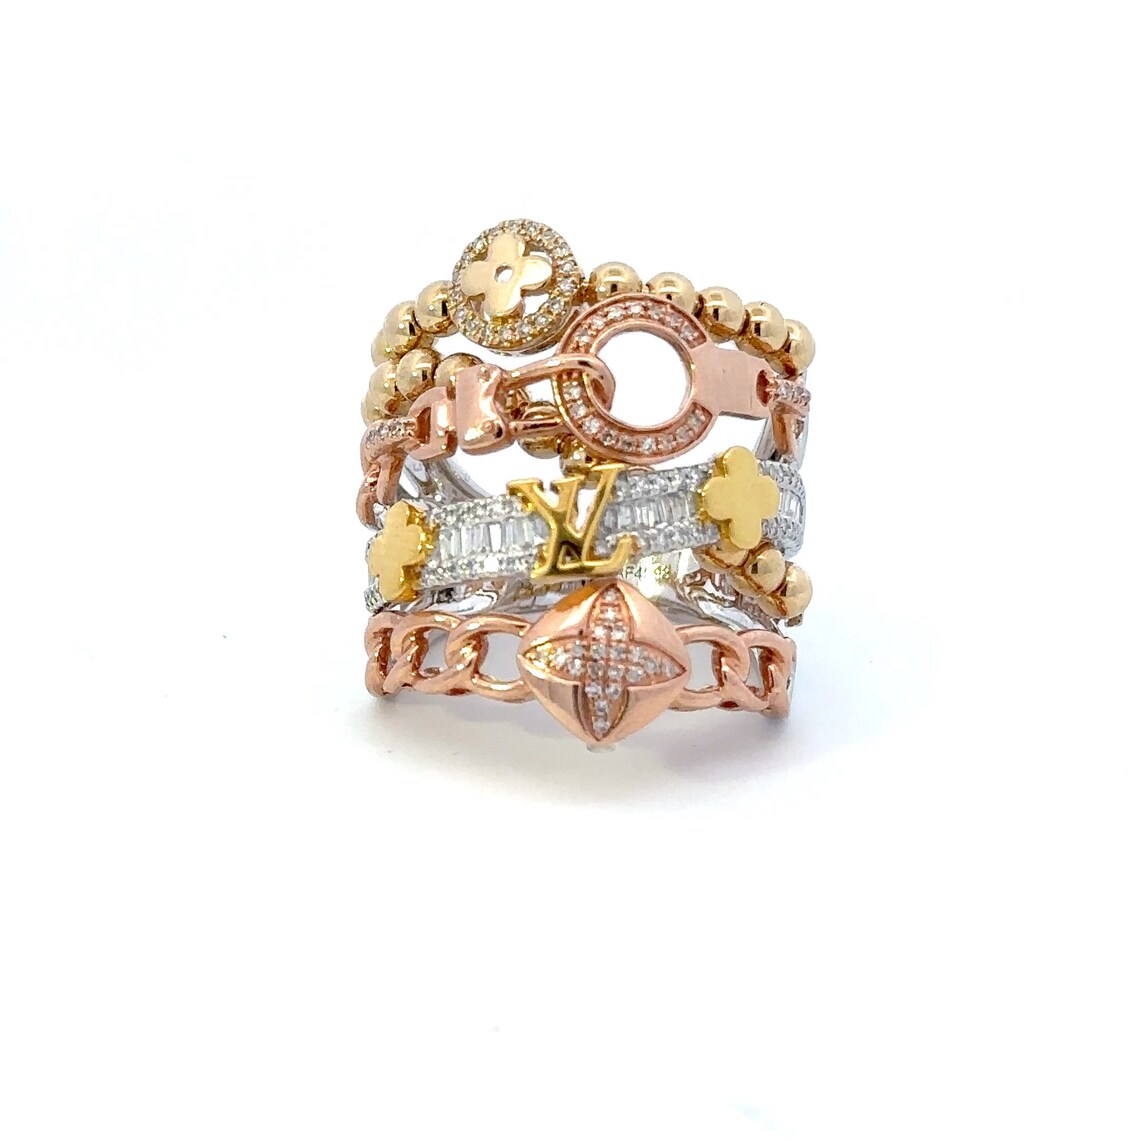 Vintage Inspired Four-Band Diamond Ring